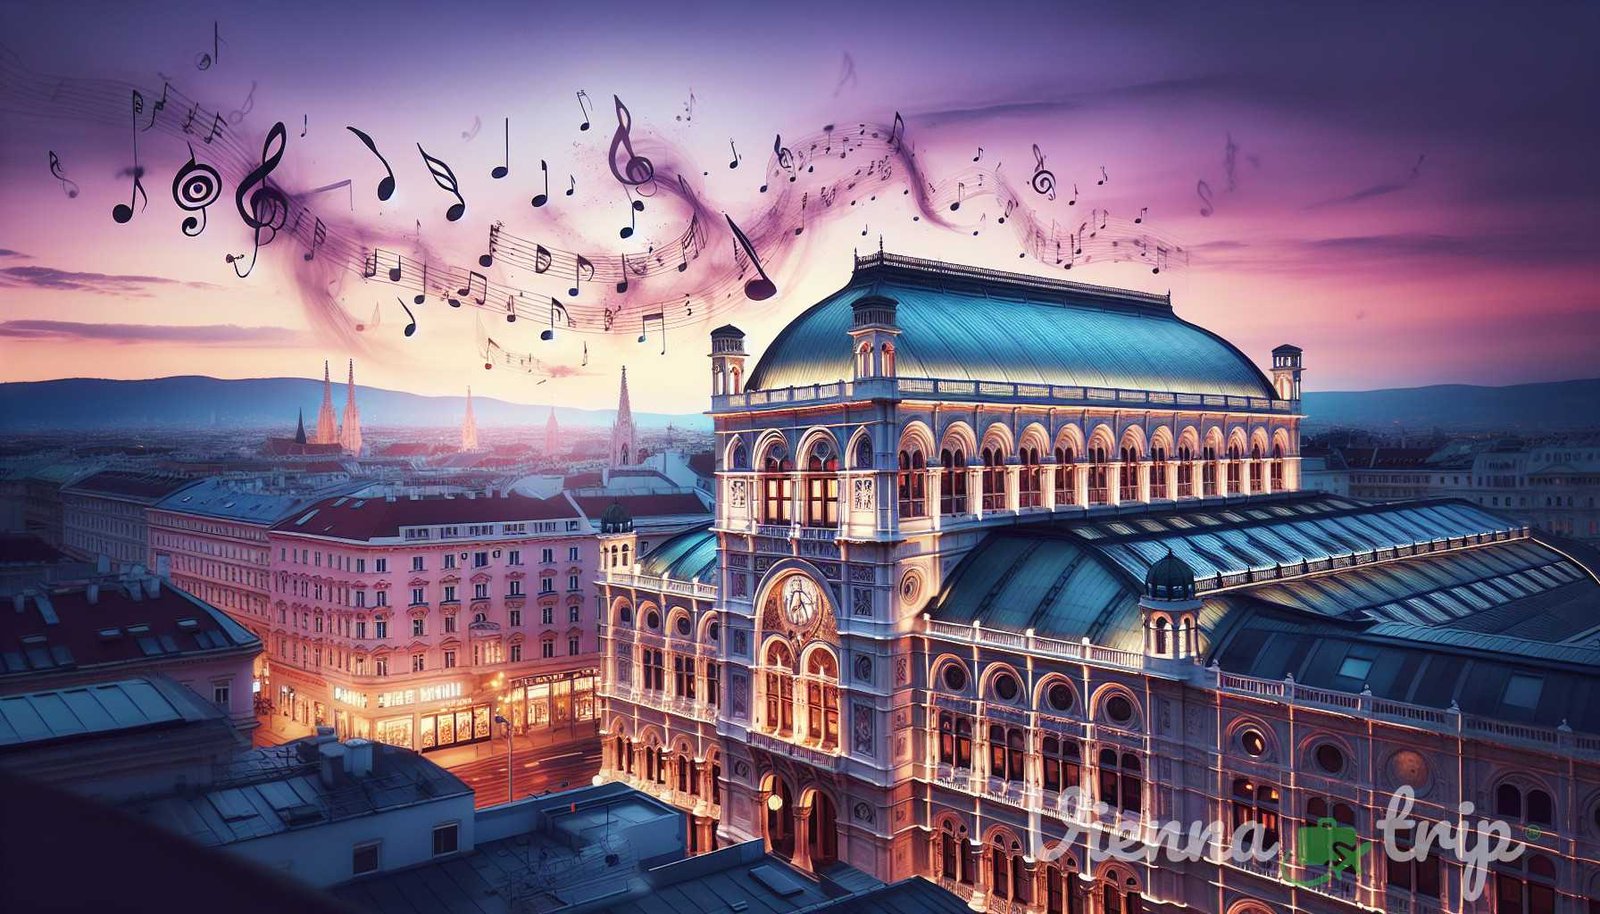 Illustration for section: While the works of Mozart, Beethoven, and Schubert often take center stage in Vienna's musical lands - vienna symphonies